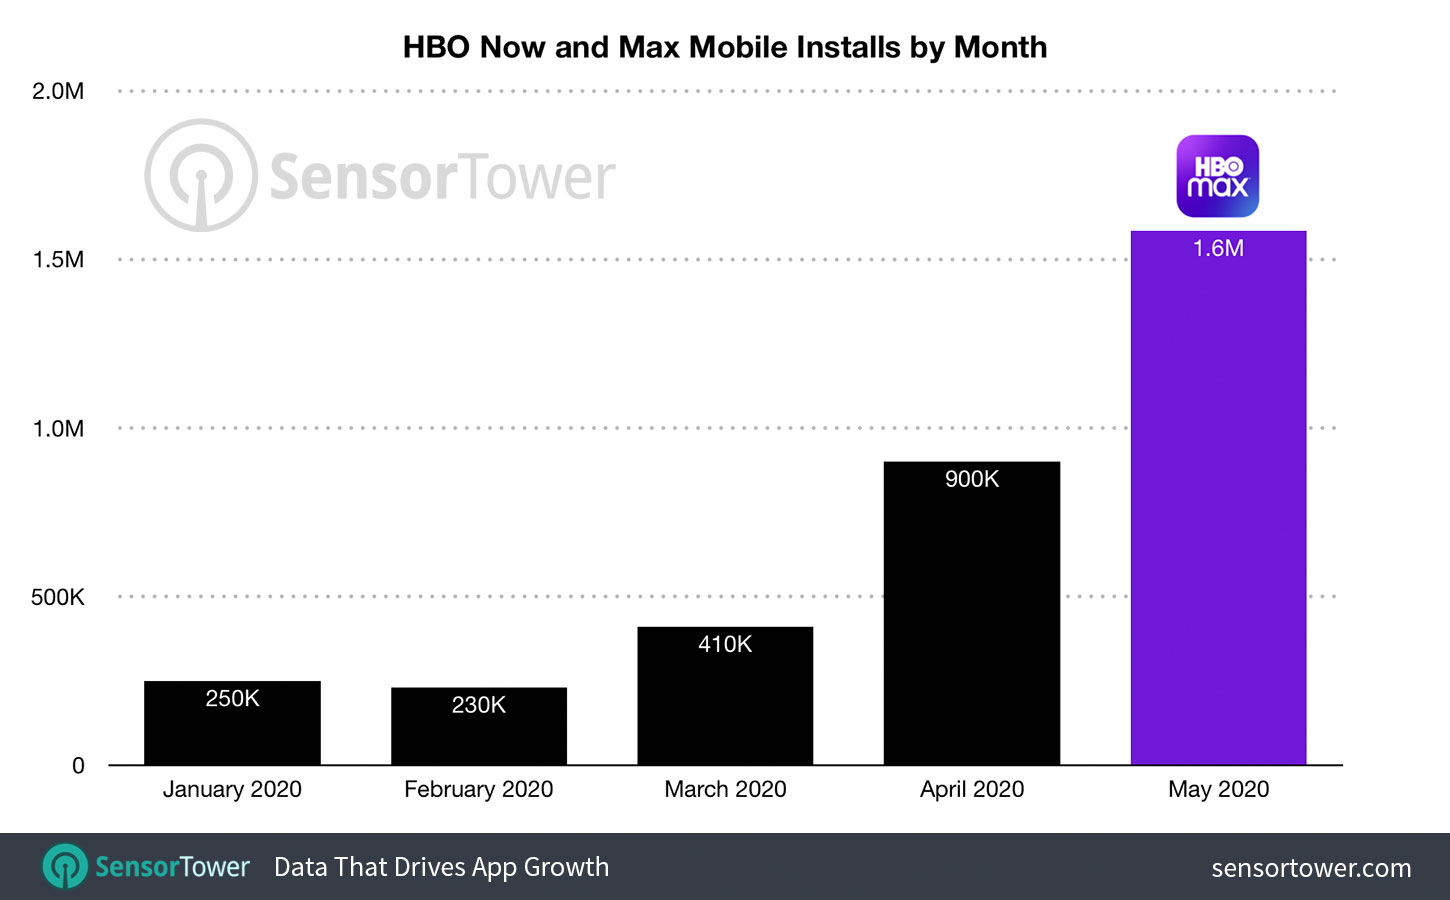 Monthly Mobile Installs of HBO Now and HBO Max from January 2020 to May 2020